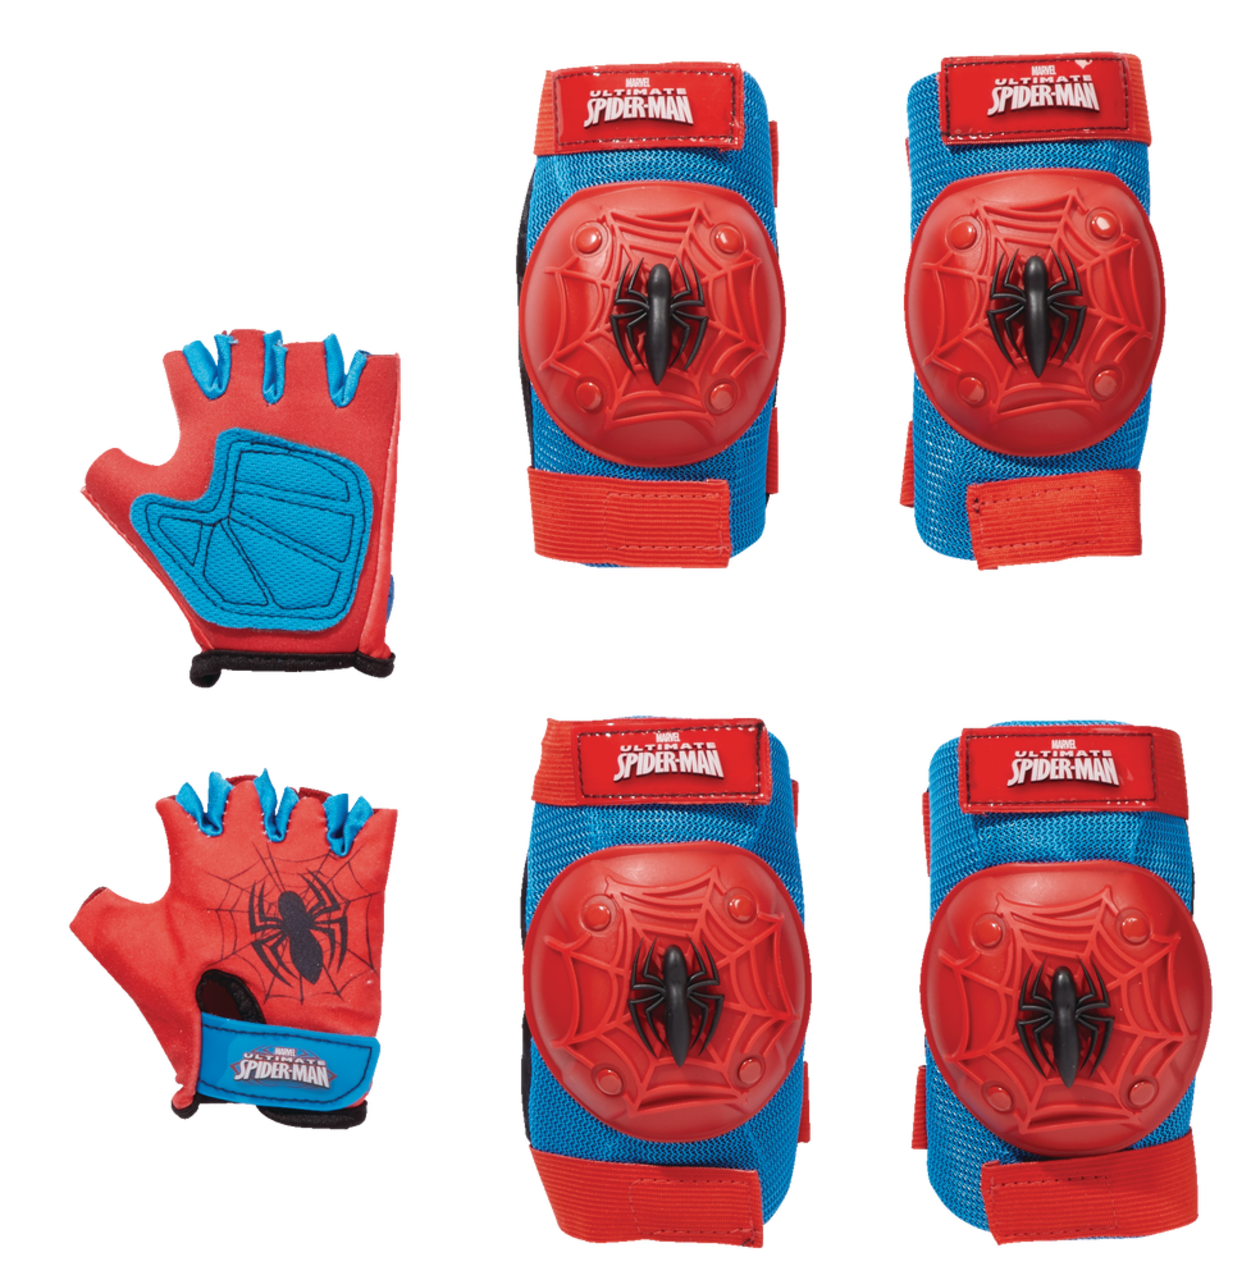 https://media-www.canadiantire.ca/product/playing/cycling/bicycle-accessories/0730126/spiderman-protective-set-b9c73952-e2c4-4519-bf47-59270af1fd1f.png?imdensity=1&imwidth=640&impolicy=mZoom